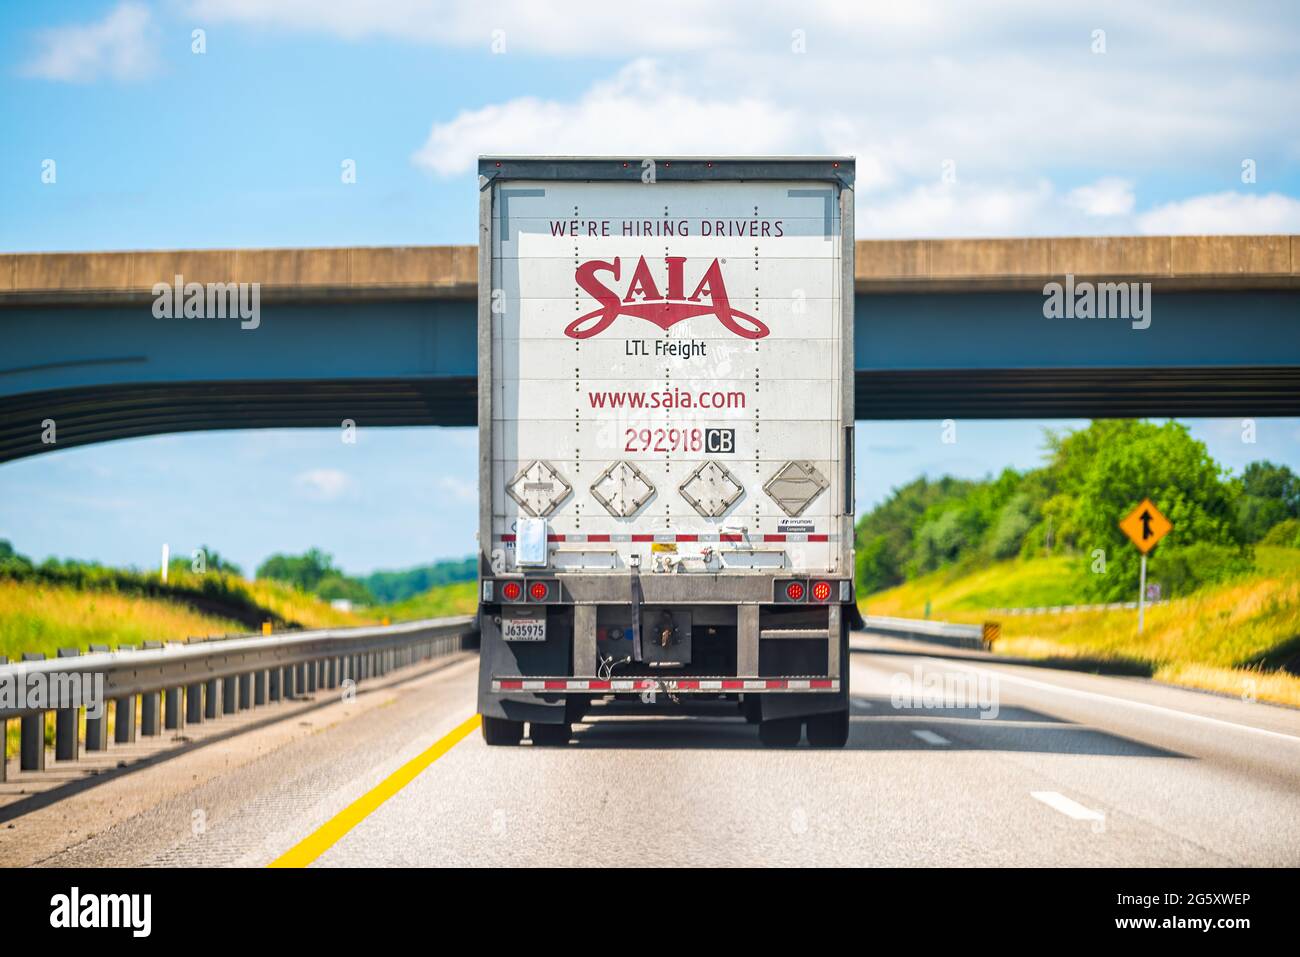 Lexington, USA - May 27, 2021: Highway road in Virginia with truck vehicle for Saia transport and sign for hiring drivers application on online websit Stock Photo